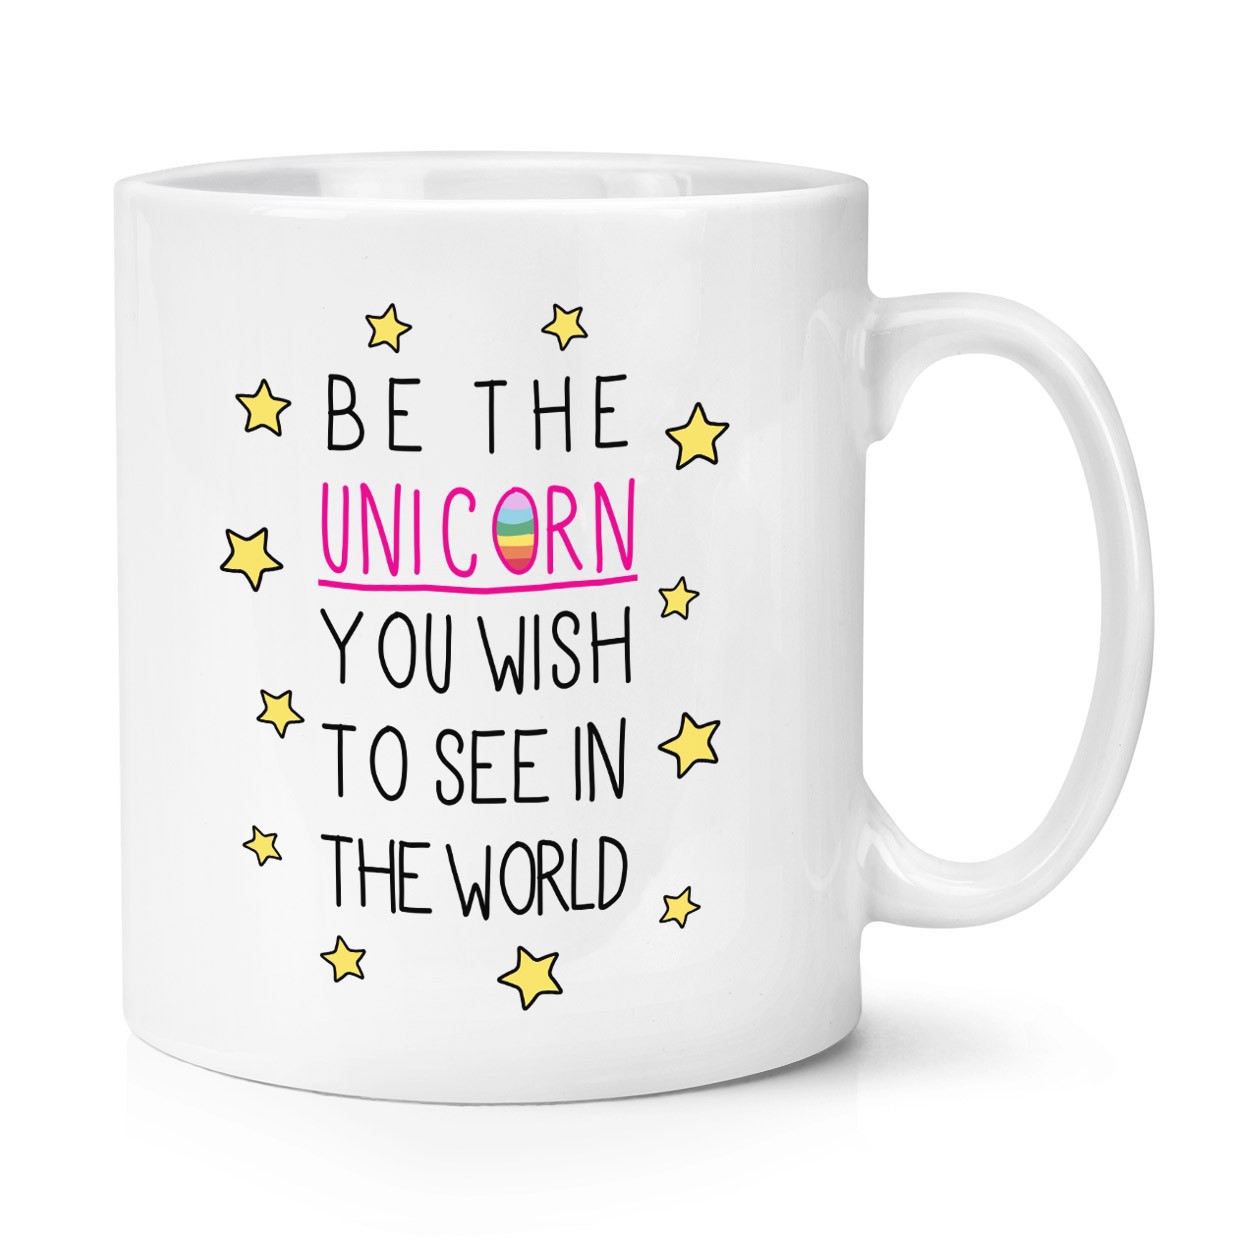 Be The Unicorn You Wish to See in the World 10oz Mug Cup